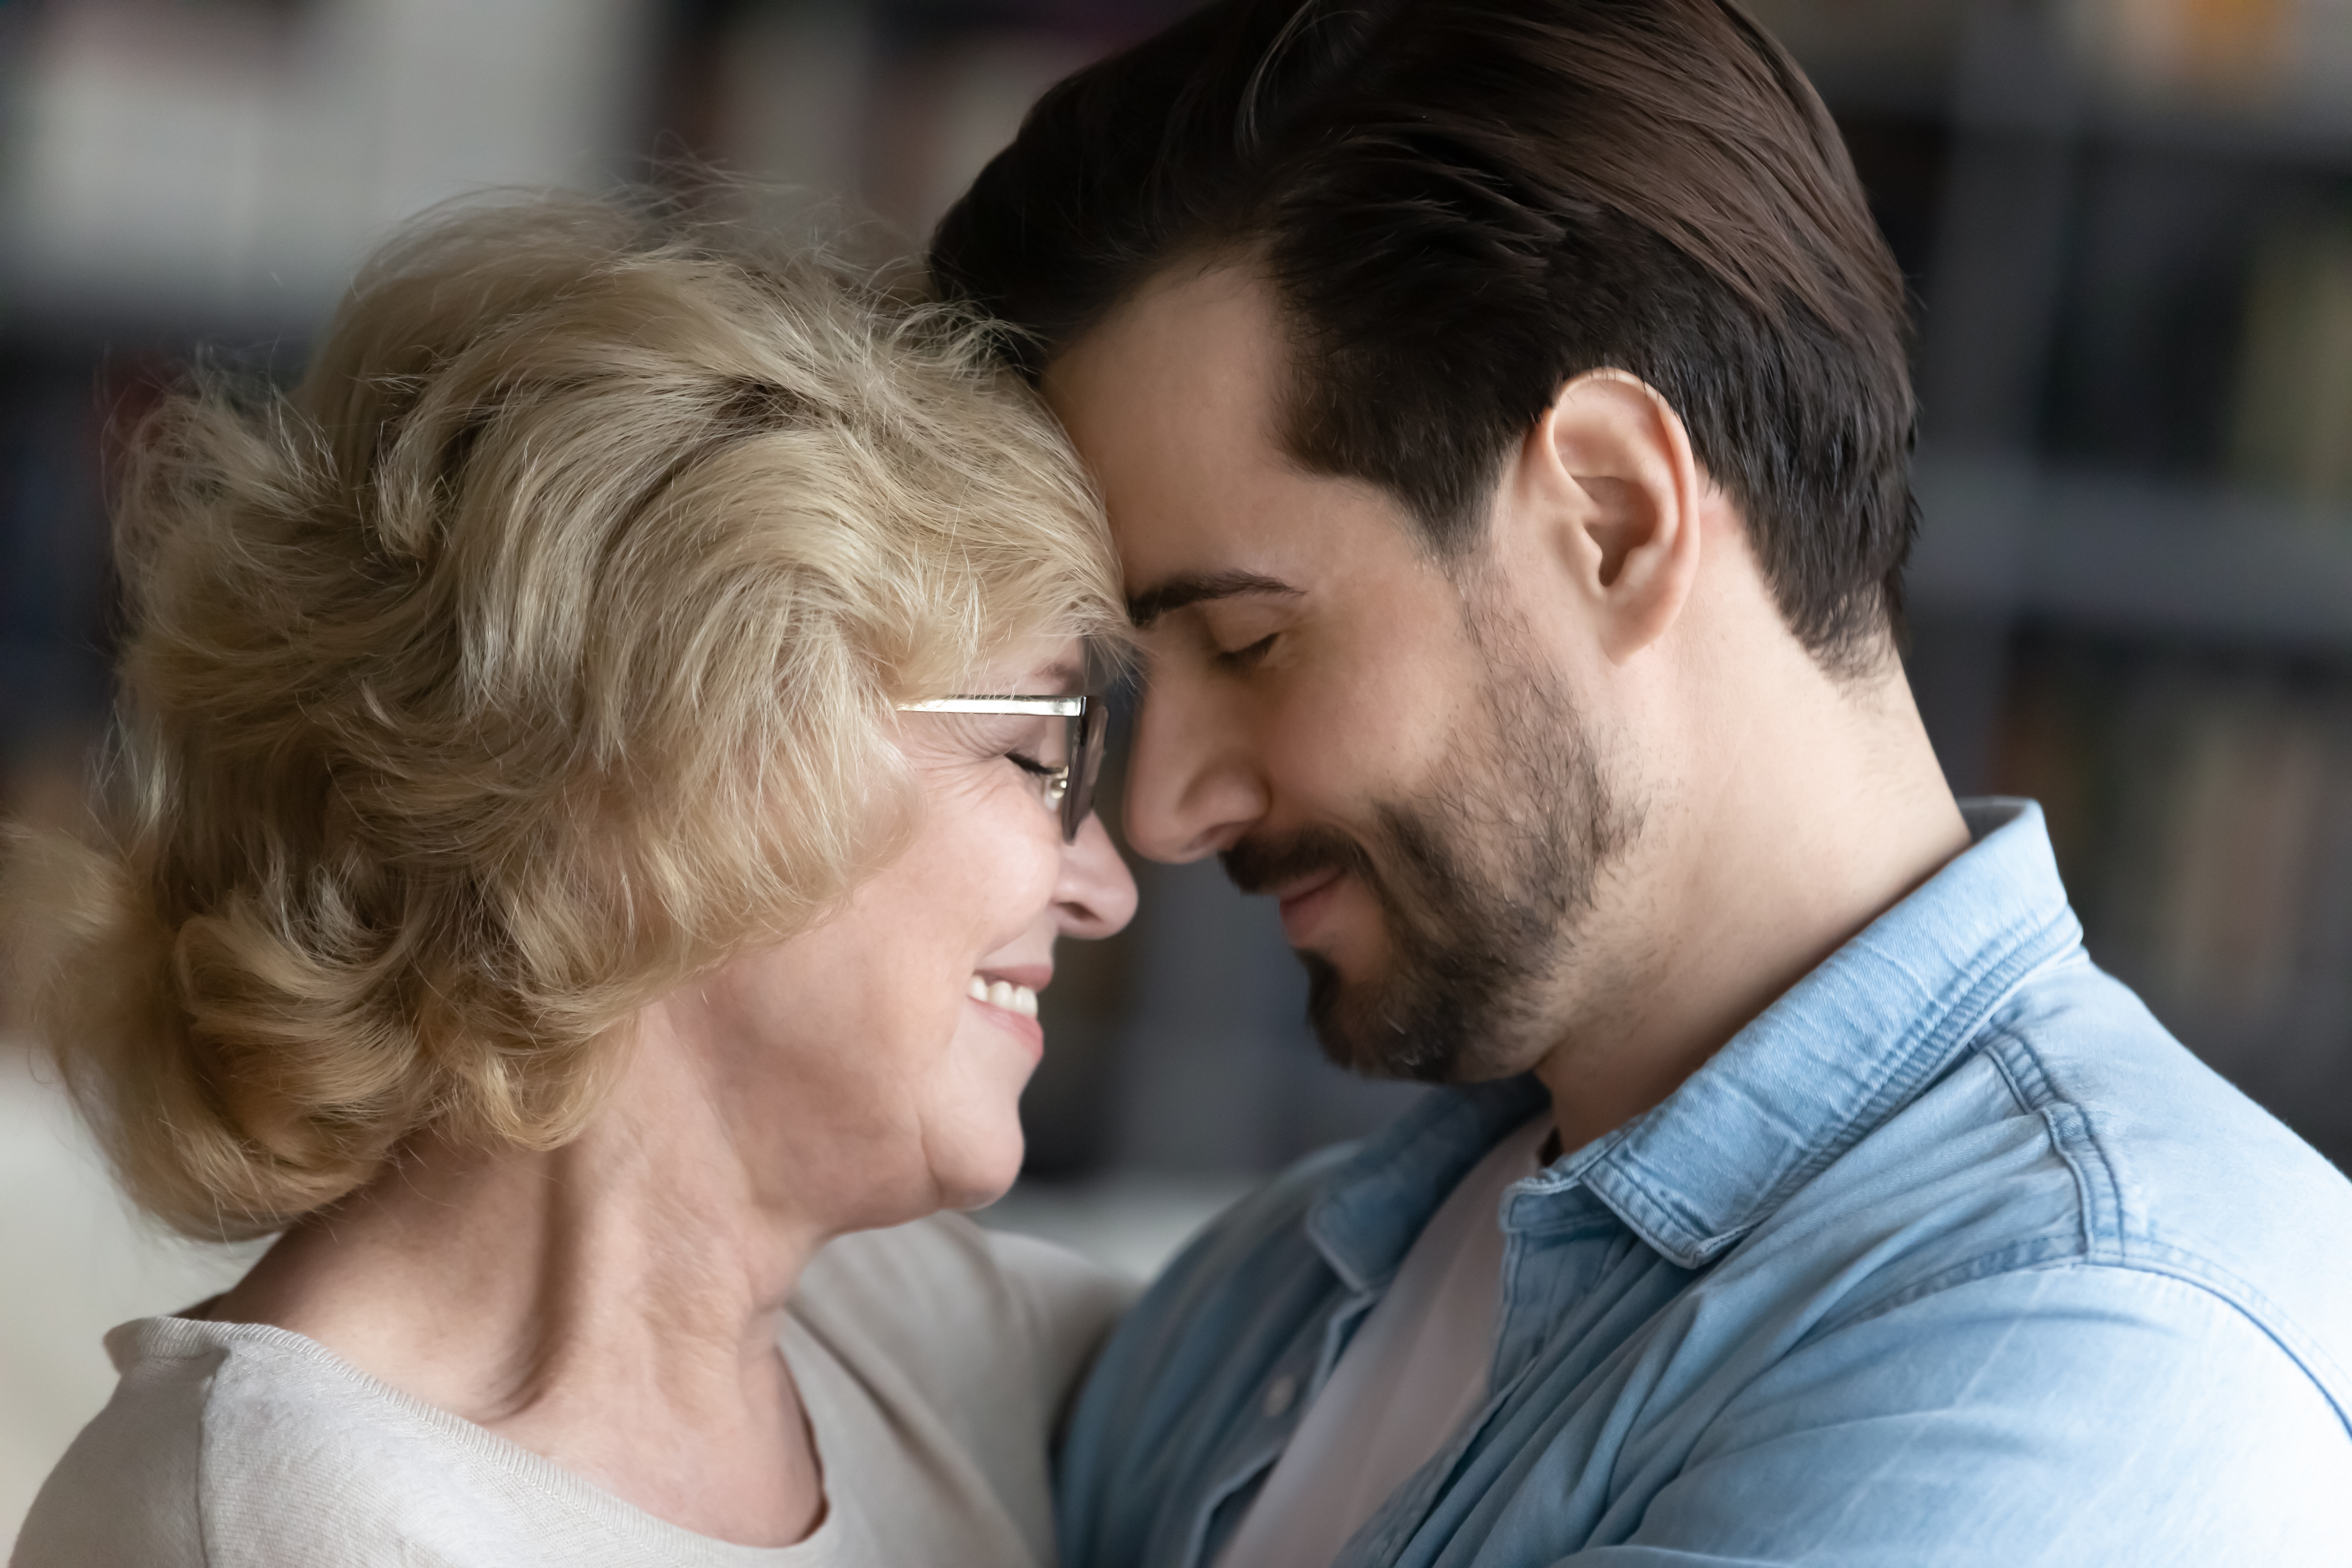 Senior mom sharing a sweet moment with her son | Source: Shutterstock